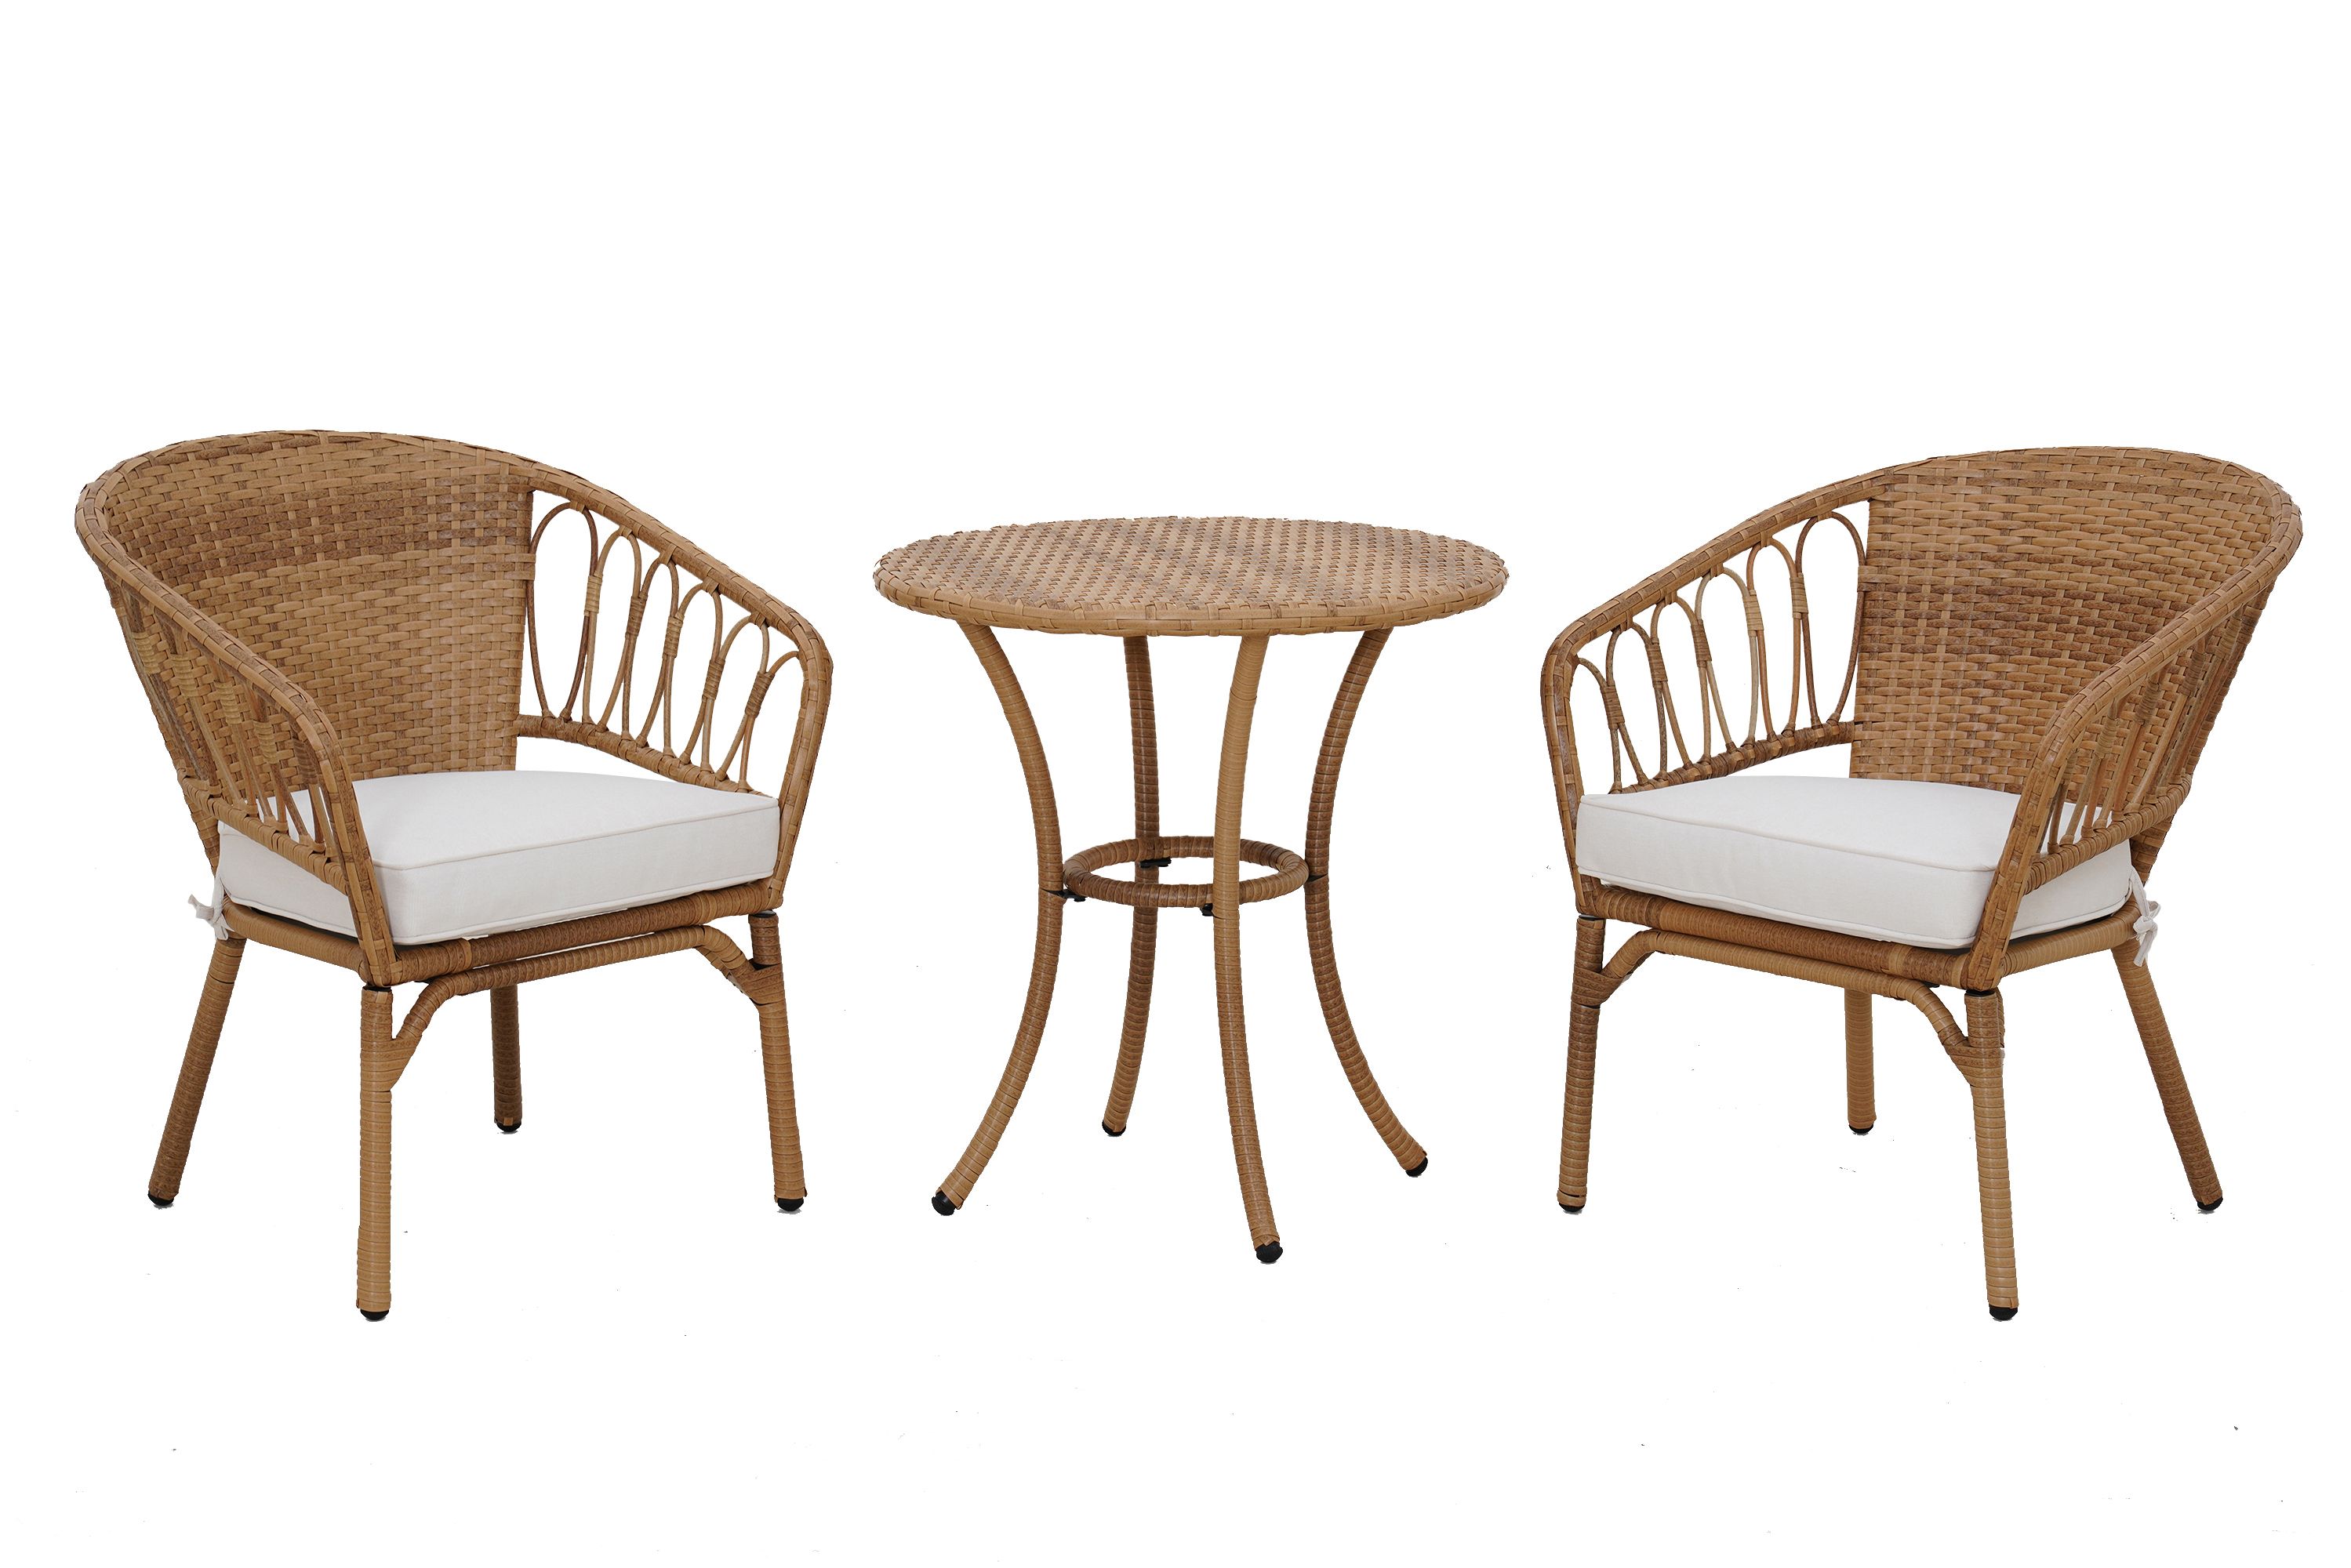 Better Homes & Gardens Willow Sage 3-Piece Bistro Set with Wicker Table, Beige - image 2 of 7